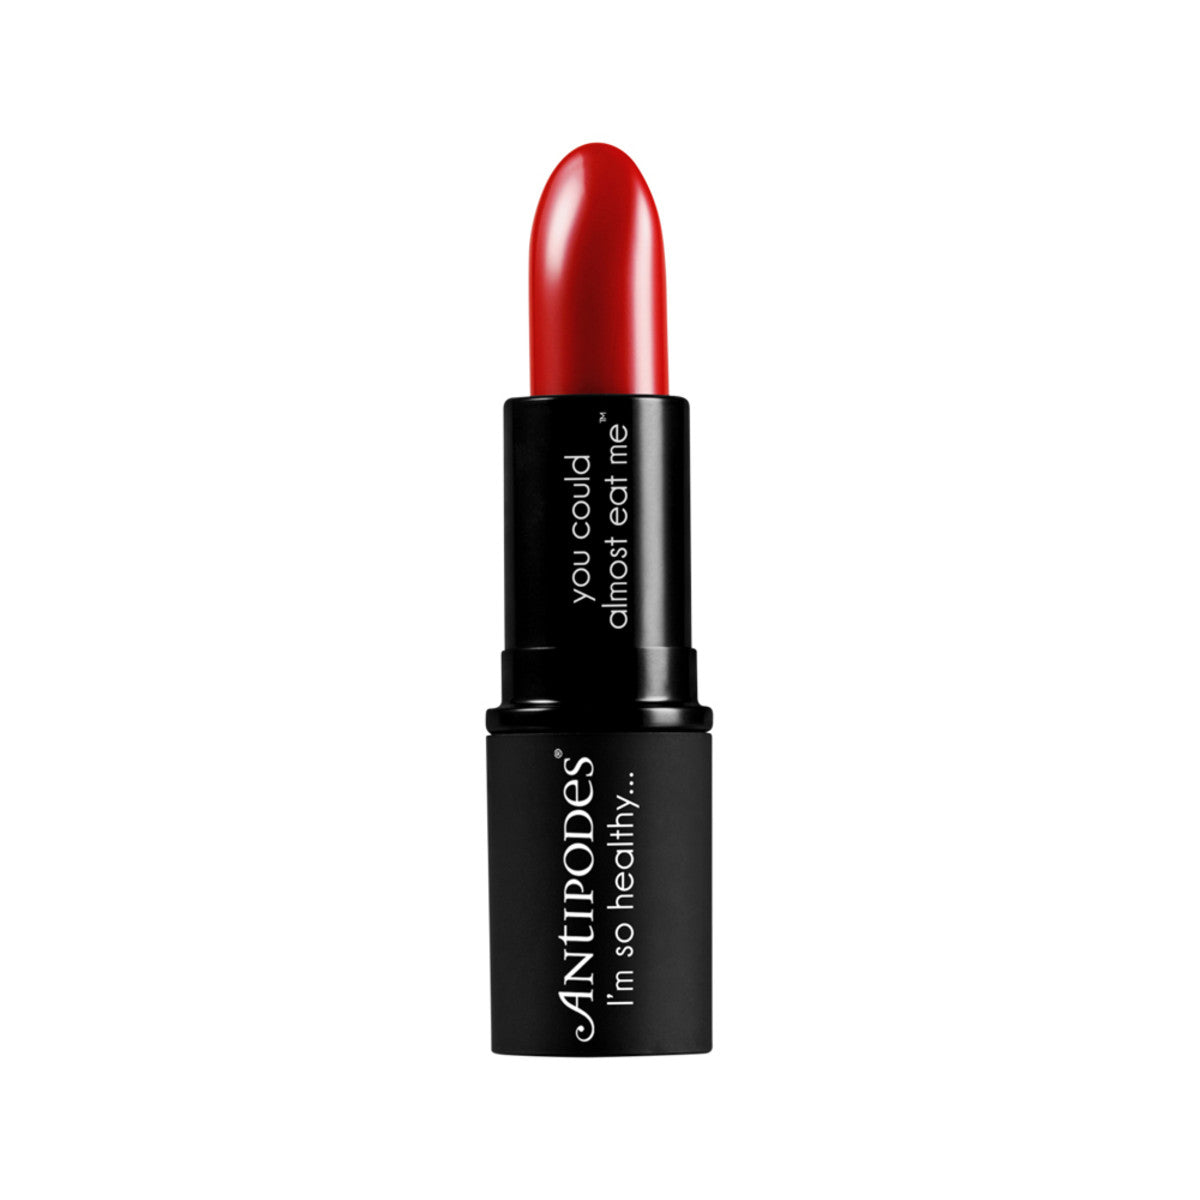 Antipodes Ruby Bay Rouge Moisture-Boost Natural Lipstick 4g-The Living Co.